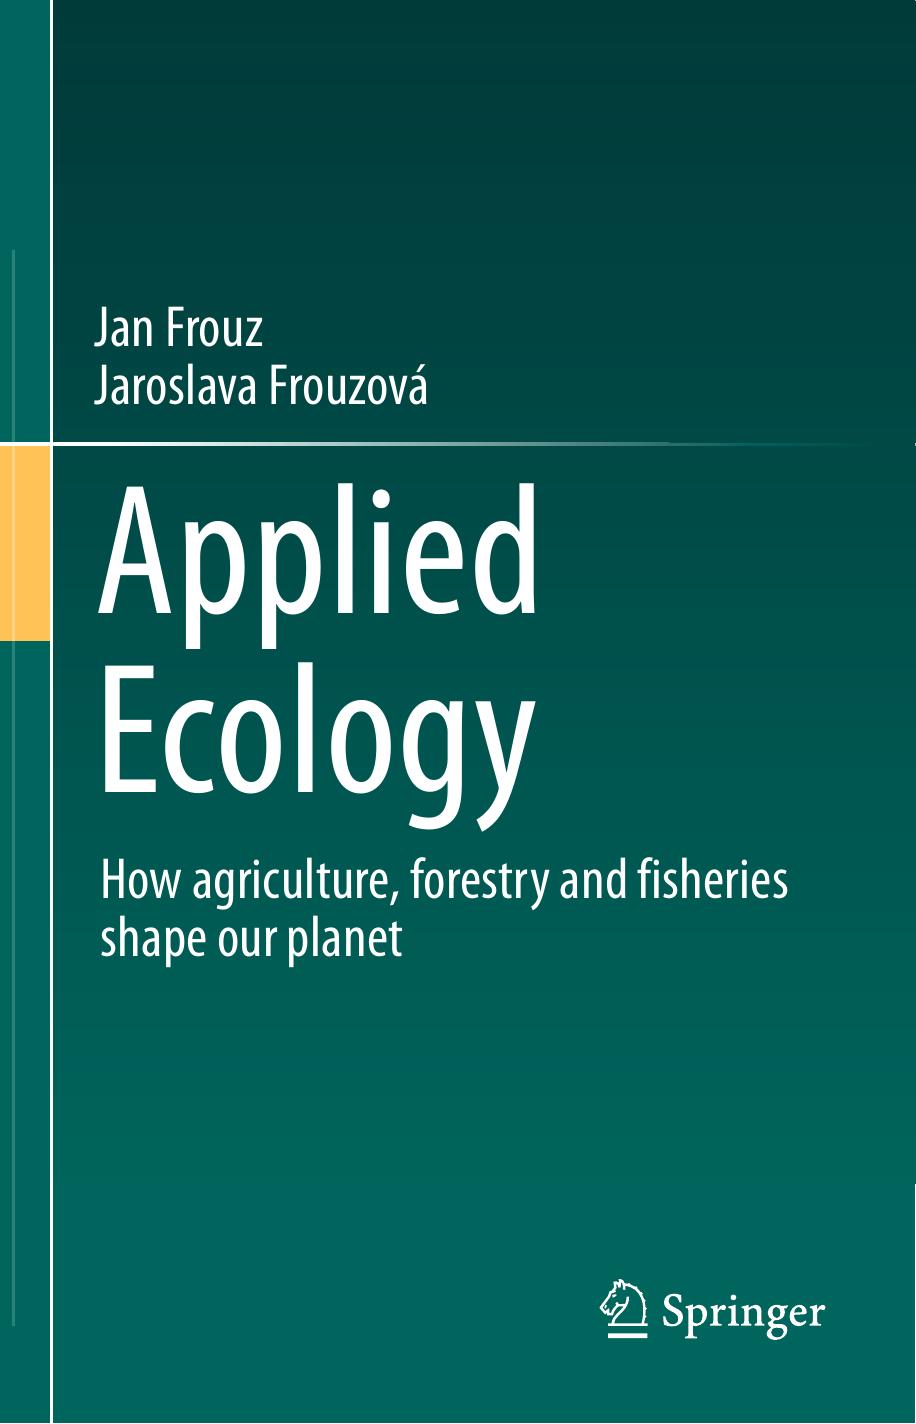 Applied Ecology  How agriculture, forestry and fisheries shape our planet-Springer (2021)